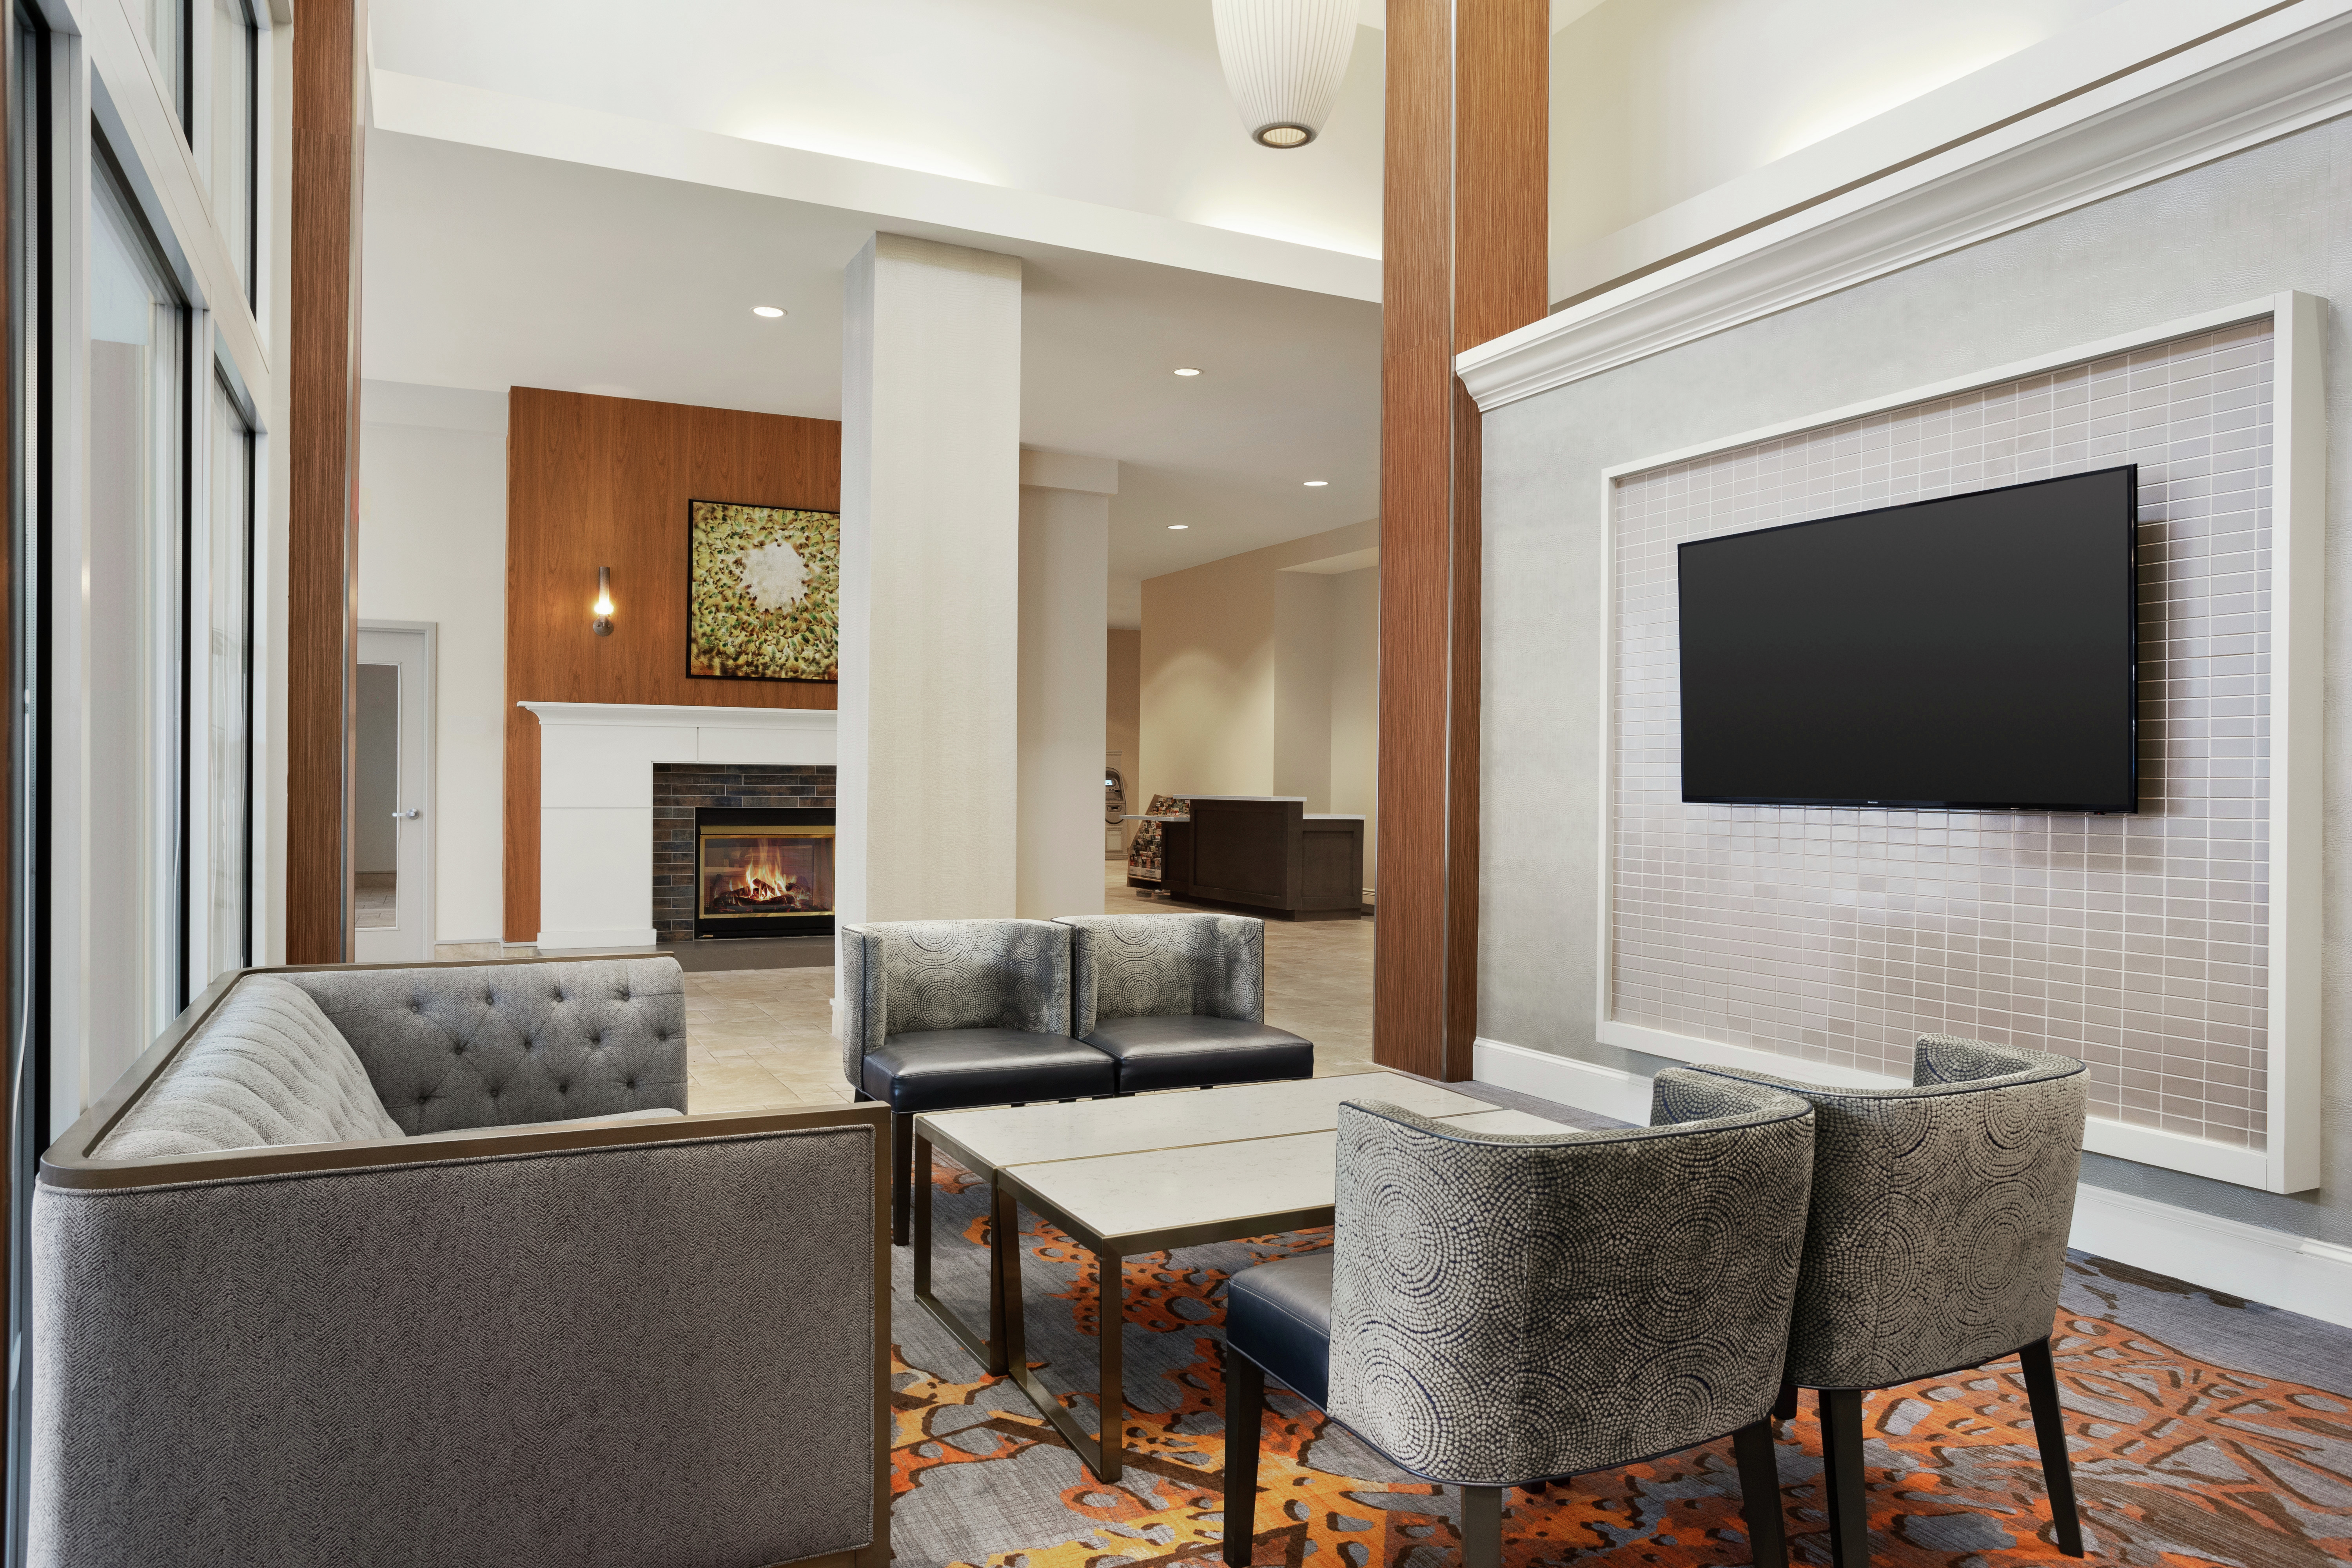 Lobby Lounge Seating Area with Television